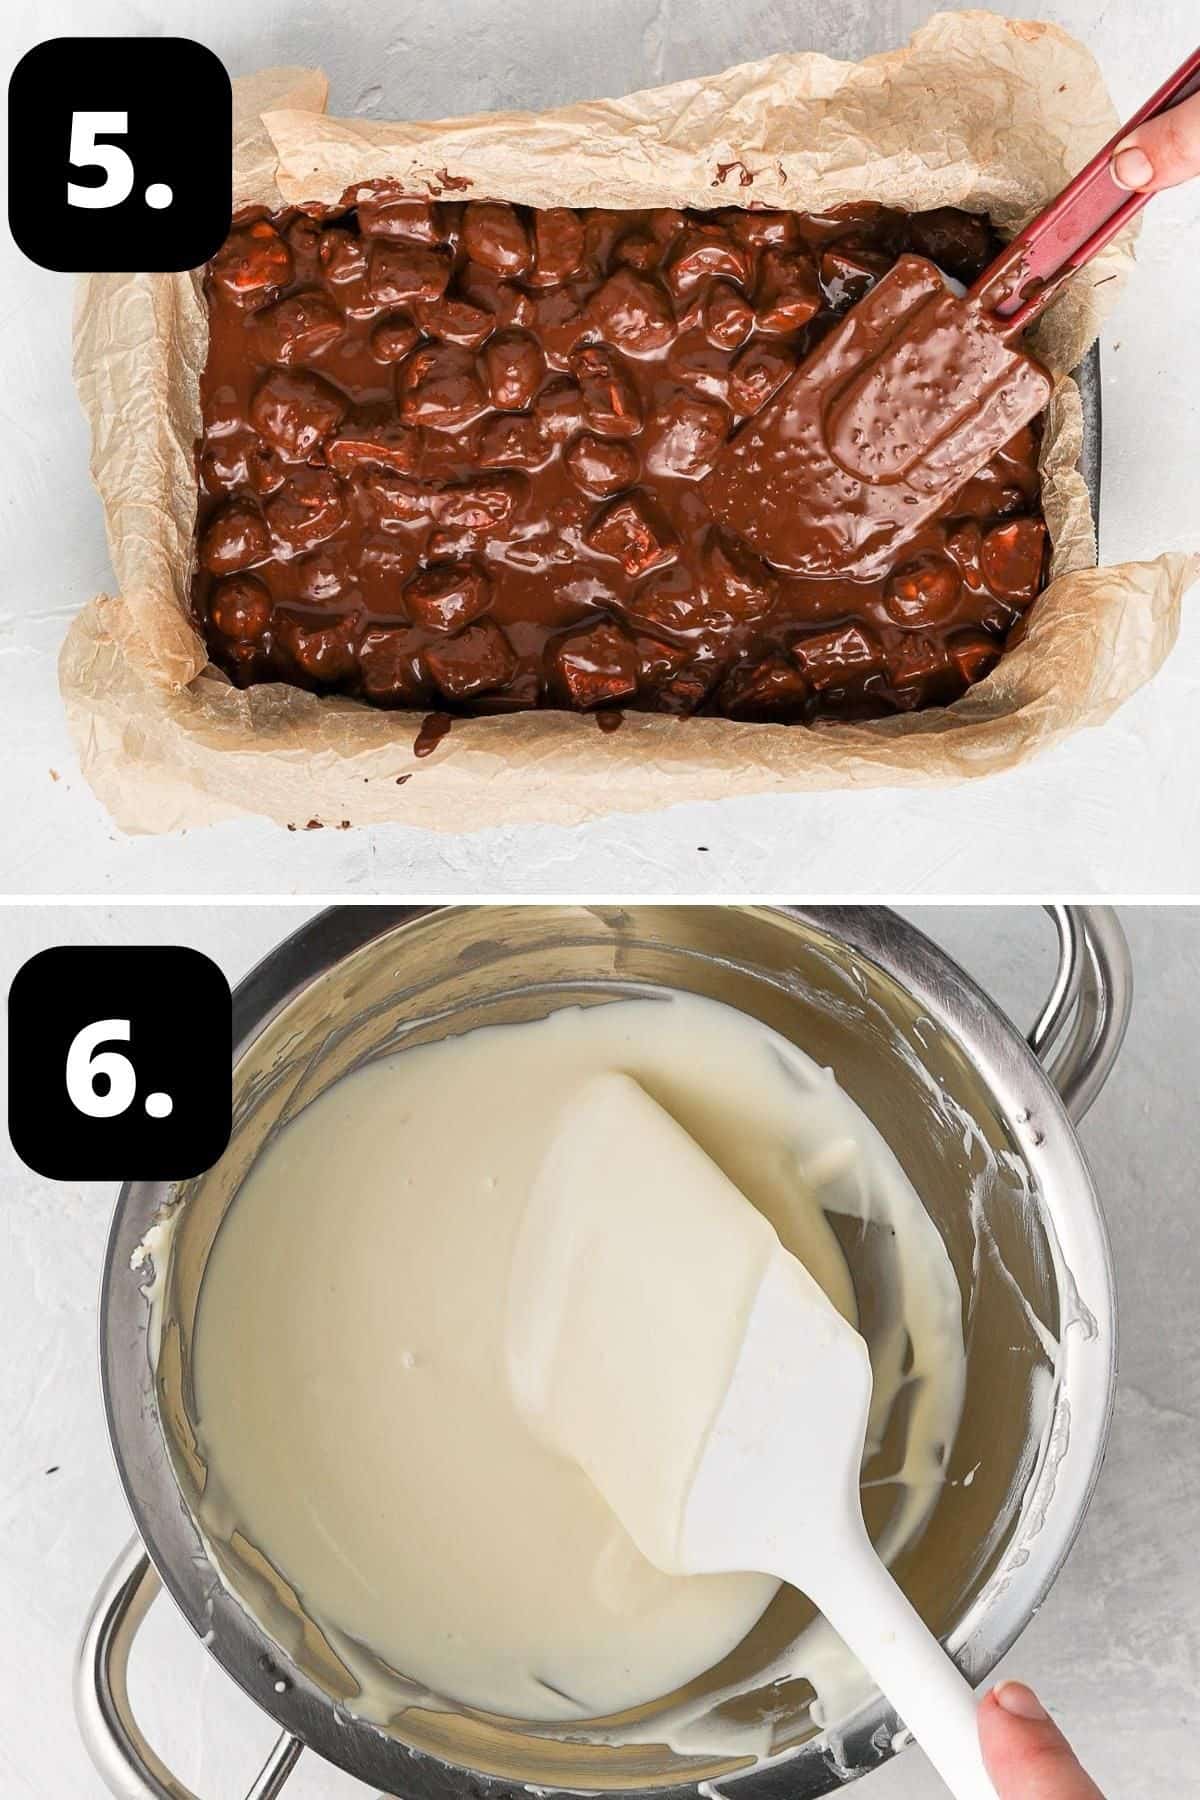 Steps 5-6 of preparing this recipe - adding the rocky road mixture to a lined tin and melting the white chocolate topping.